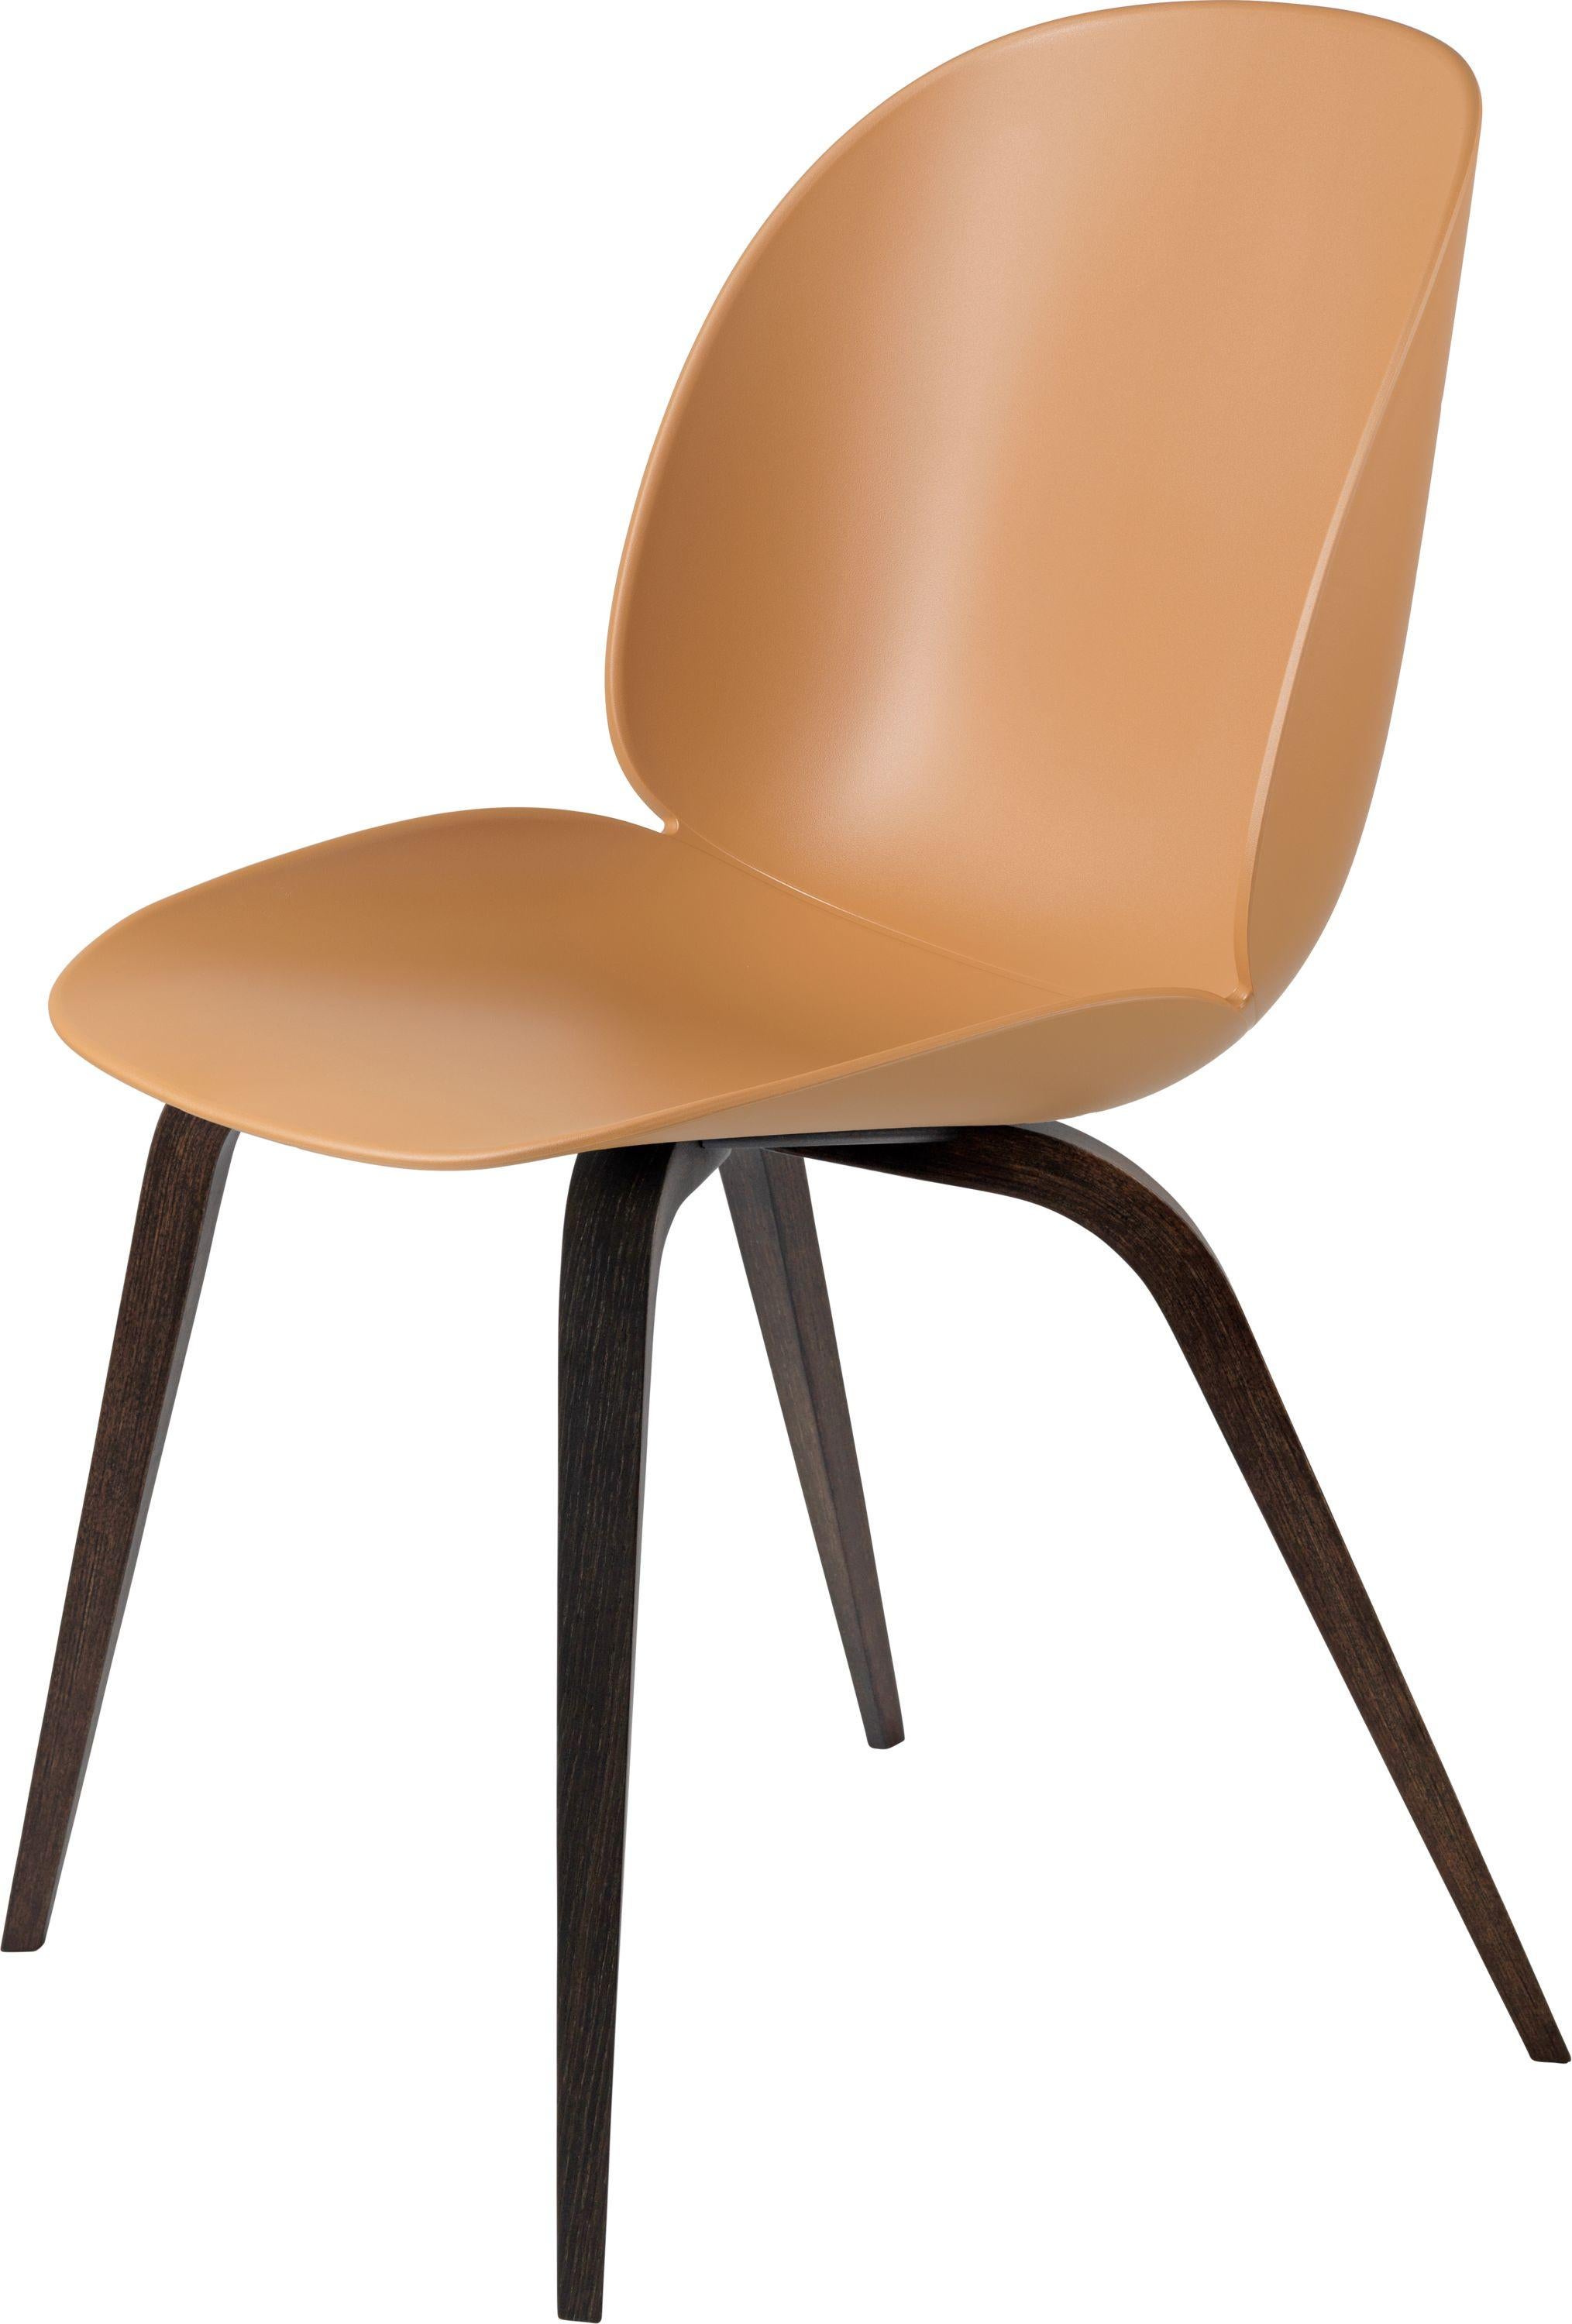 Lacquered GamFratesi 'Beetle' Dining Chair with Smoked Oak Conic Base